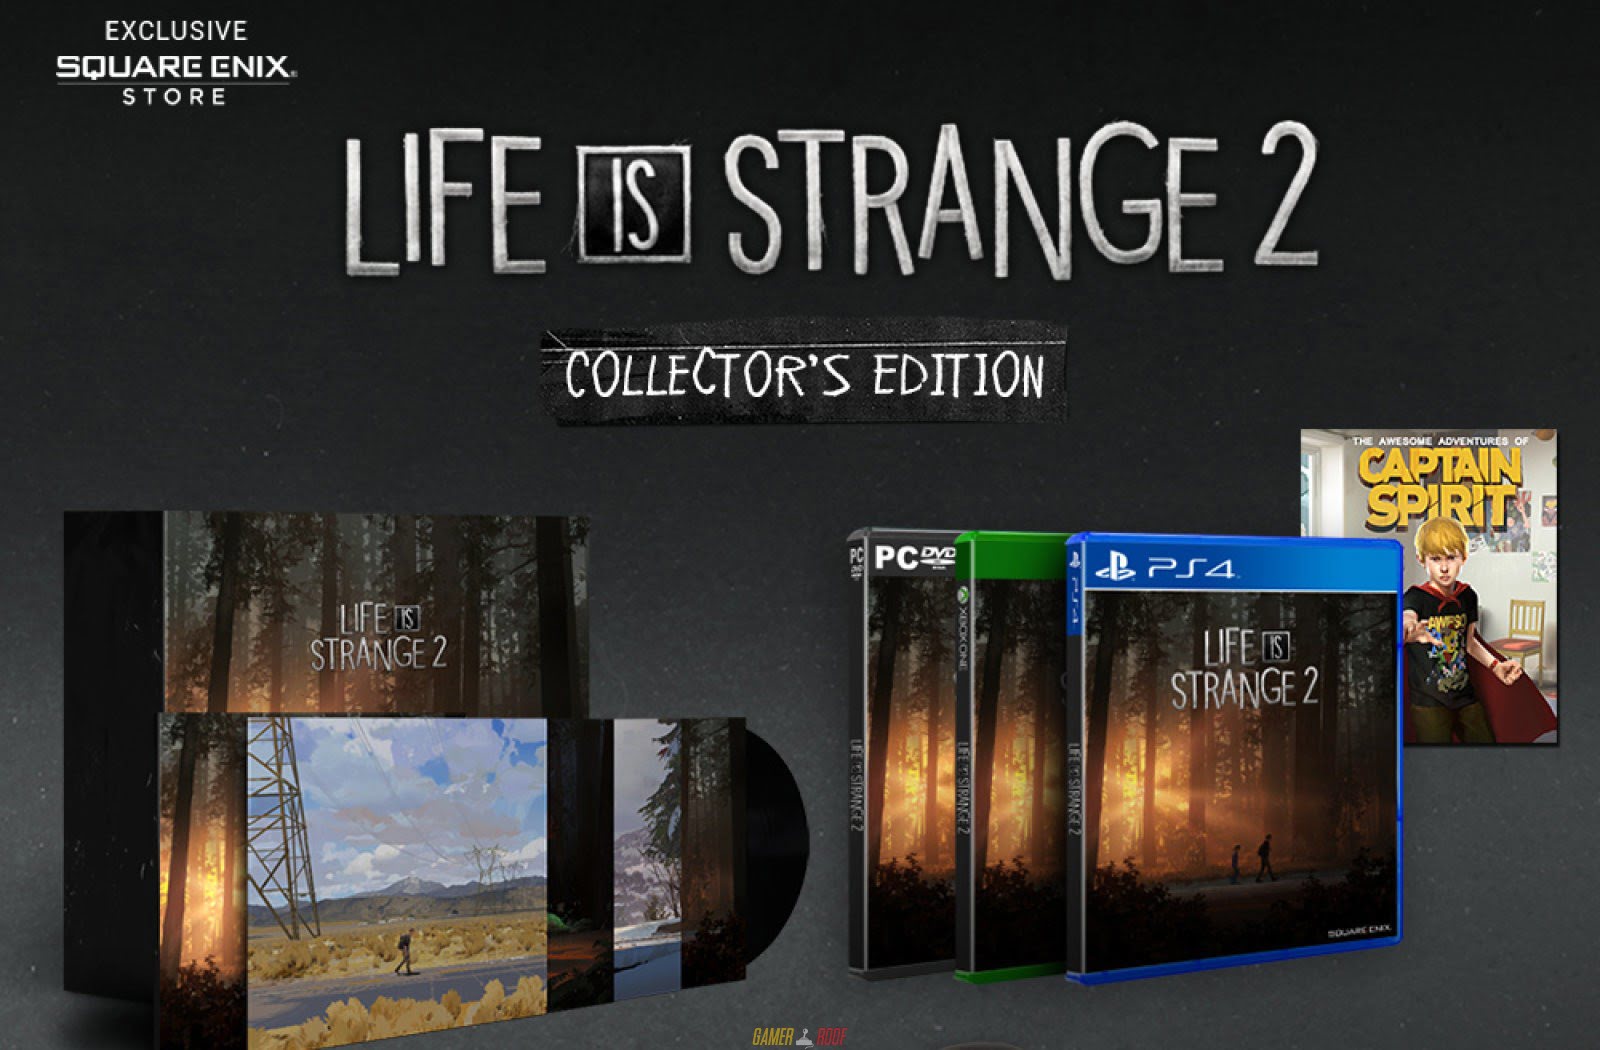 Life is Strange 2 Collector’s Edition PC Version Full Game Free Download